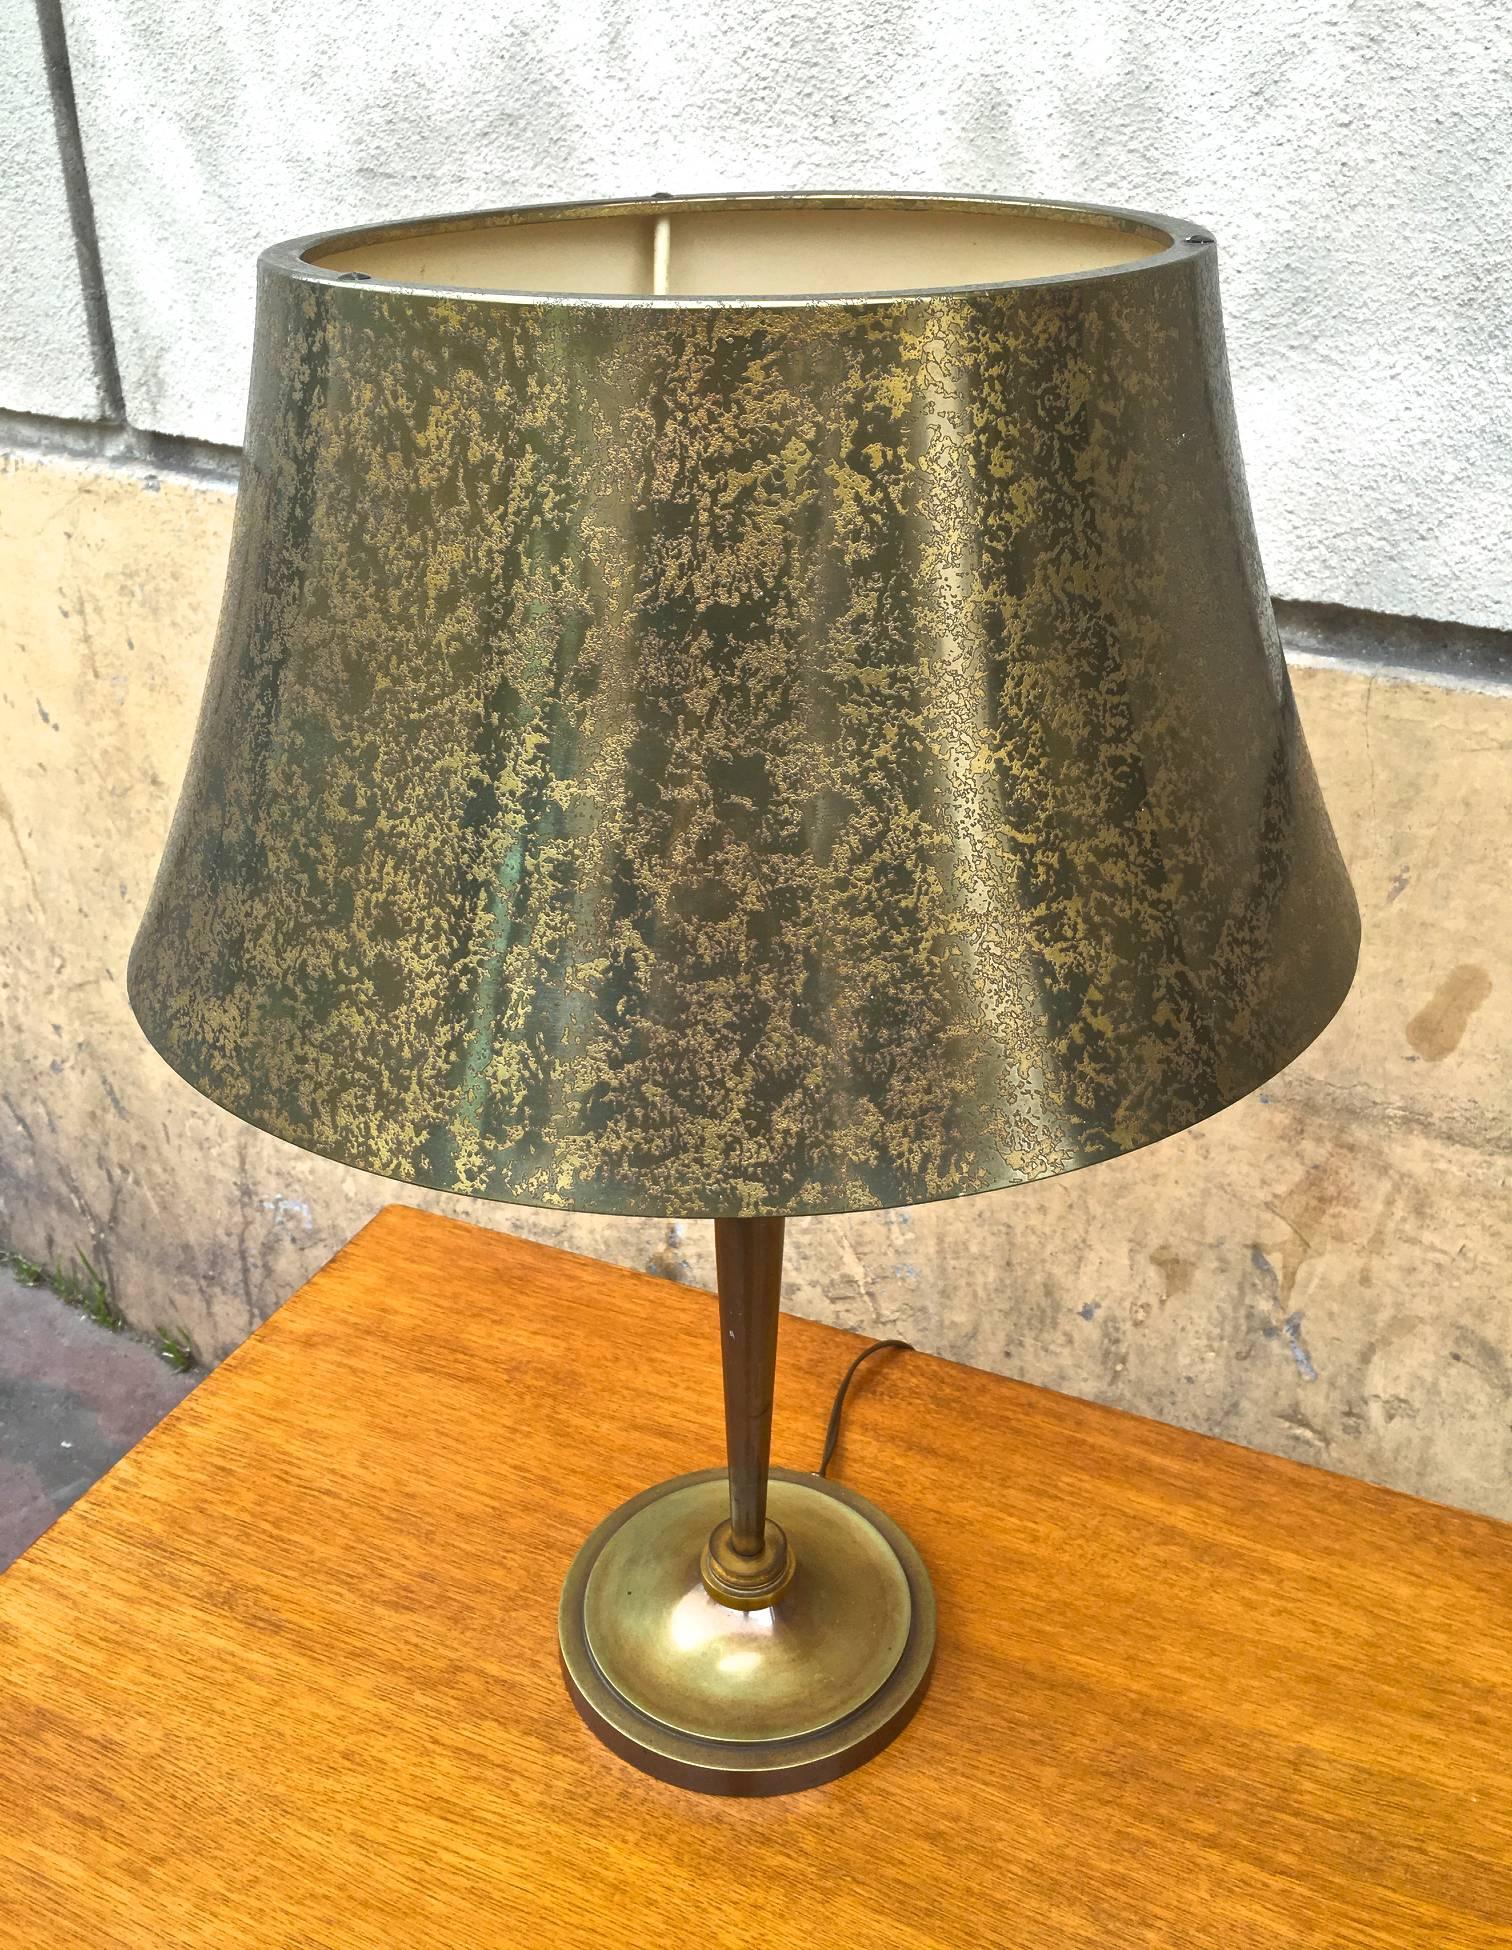 Genet Michon Superb Quality Gold Bronze Desk Lamp with Acid Engraved Shade In Excellent Condition For Sale In Paris, ile de france